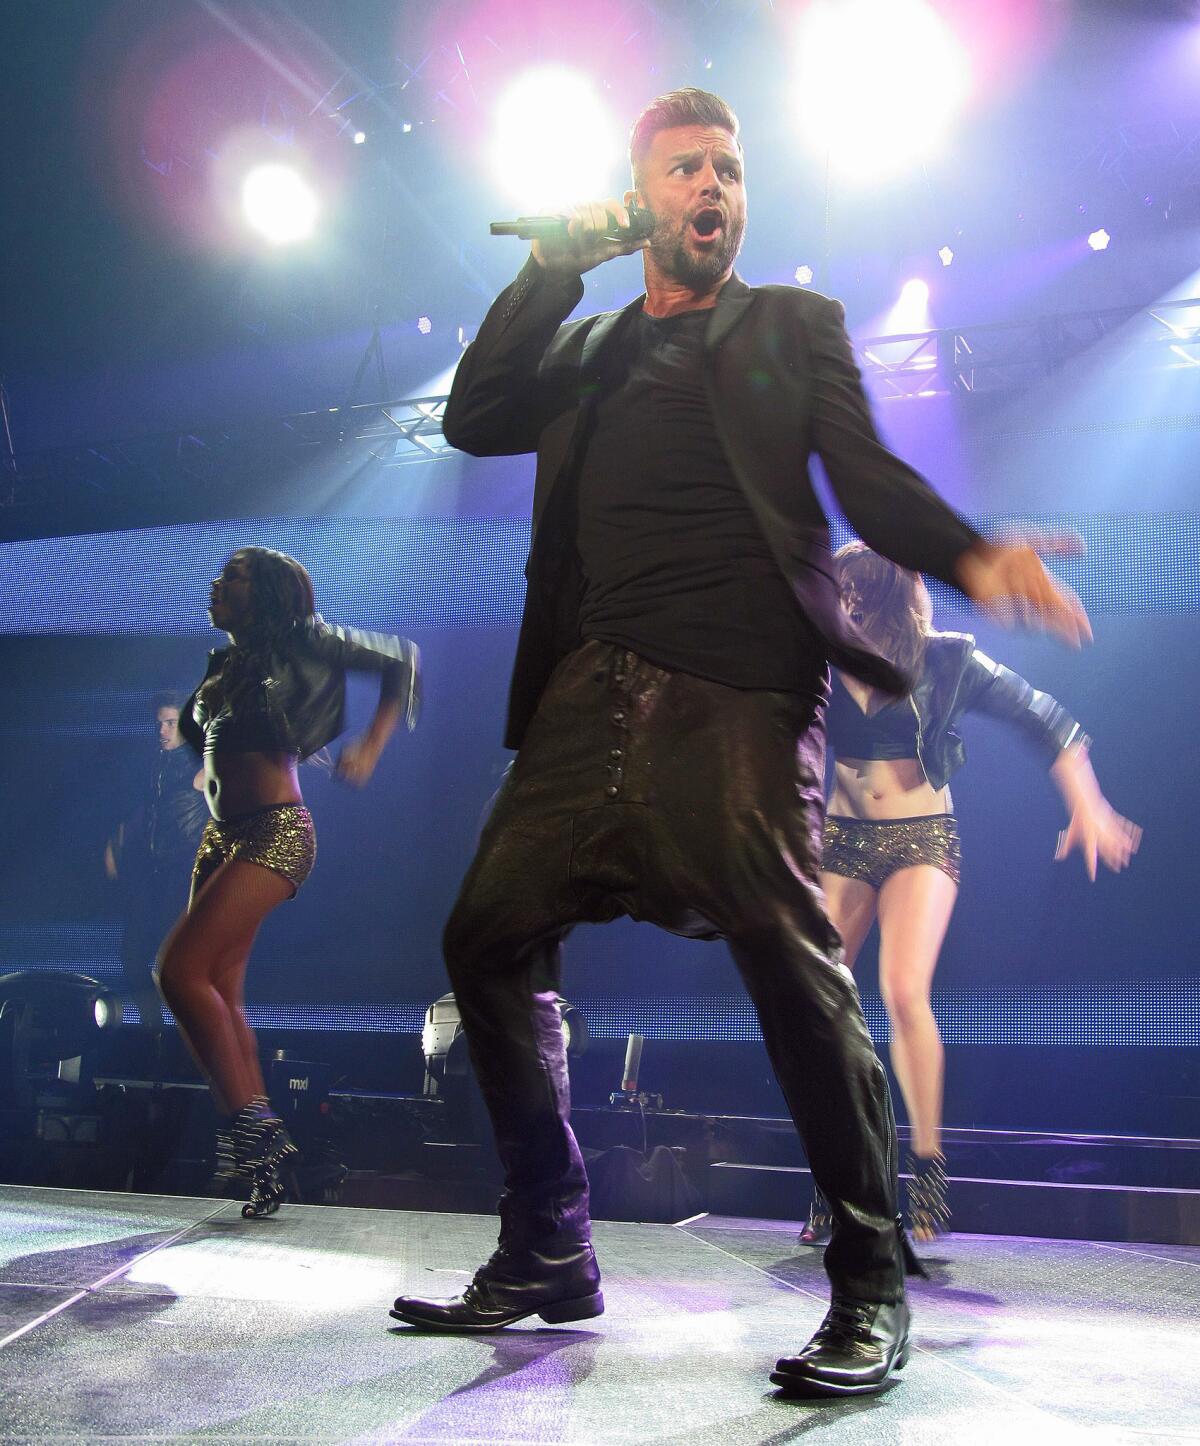 Singer Ricky Martin, seen here performing this month during the "KQ Live Concert" in San Juan, Puerto Rico, will perform at Moon Palace Golf & Spa Resort on Dec. 28.